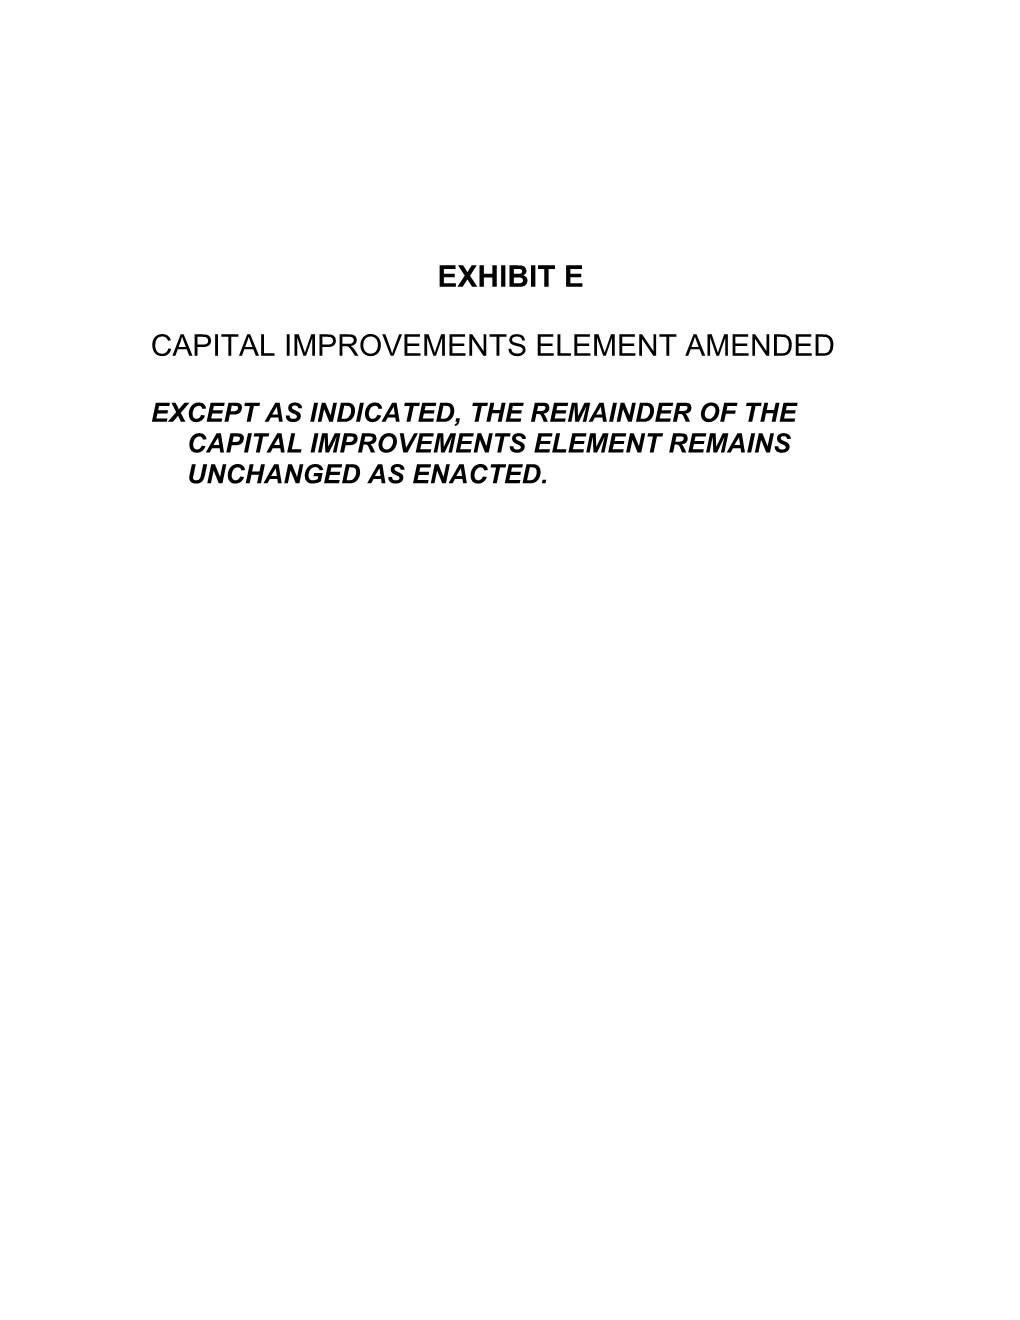 Except As Indicated, the Remainder of the Capital Improvements Element Remains Unchanged